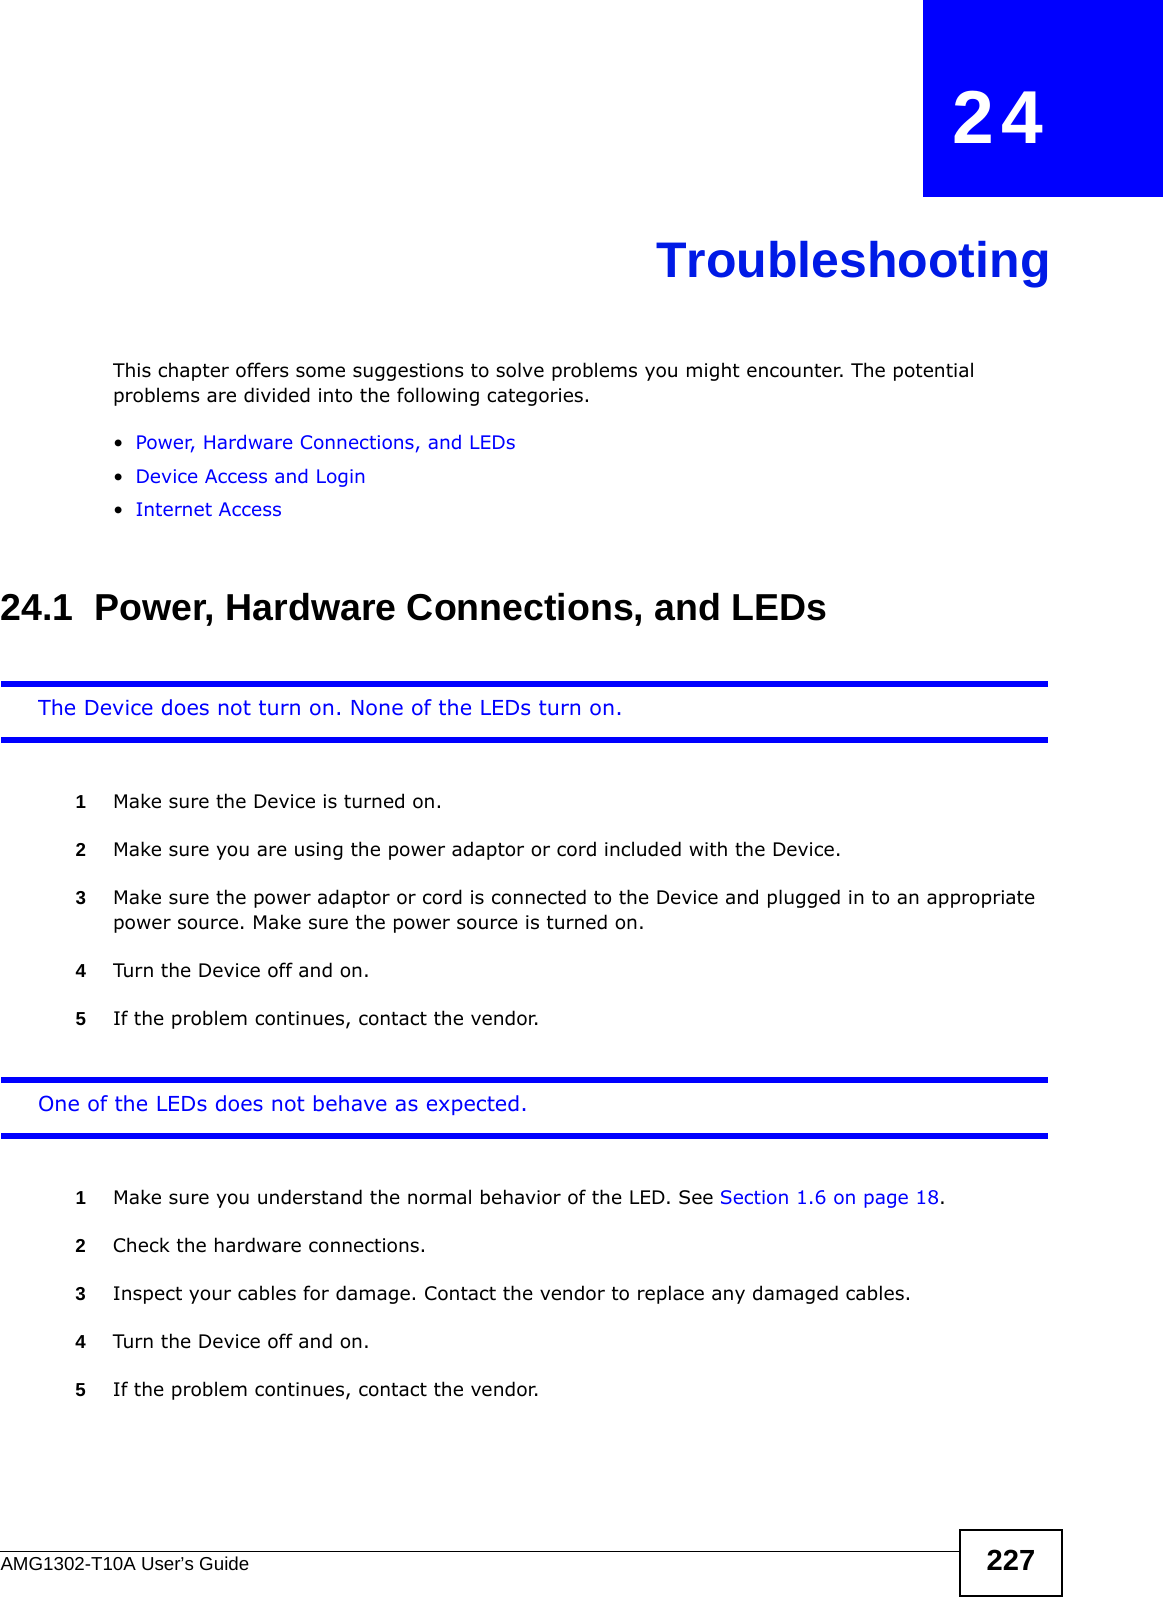 AMG1302-T10A User’s Guide 227CHAPTER   24TroubleshootingThis chapter offers some suggestions to solve problems you might encounter. The potential problems are divided into the following categories. •Power, Hardware Connections, and LEDs•Device Access and Login•Internet Access24.1  Power, Hardware Connections, and LEDsThe Device does not turn on. None of the LEDs turn on.1Make sure the Device is turned on. 2Make sure you are using the power adaptor or cord included with the Device.3Make sure the power adaptor or cord is connected to the Device and plugged in to an appropriate power source. Make sure the power source is turned on.4Turn the Device off and on.5If the problem continues, contact the vendor.One of the LEDs does not behave as expected.1Make sure you understand the normal behavior of the LED. See Section 1.6 on page 18.2Check the hardware connections.3Inspect your cables for damage. Contact the vendor to replace any damaged cables.4Turn the Device off and on.5If the problem continues, contact the vendor.